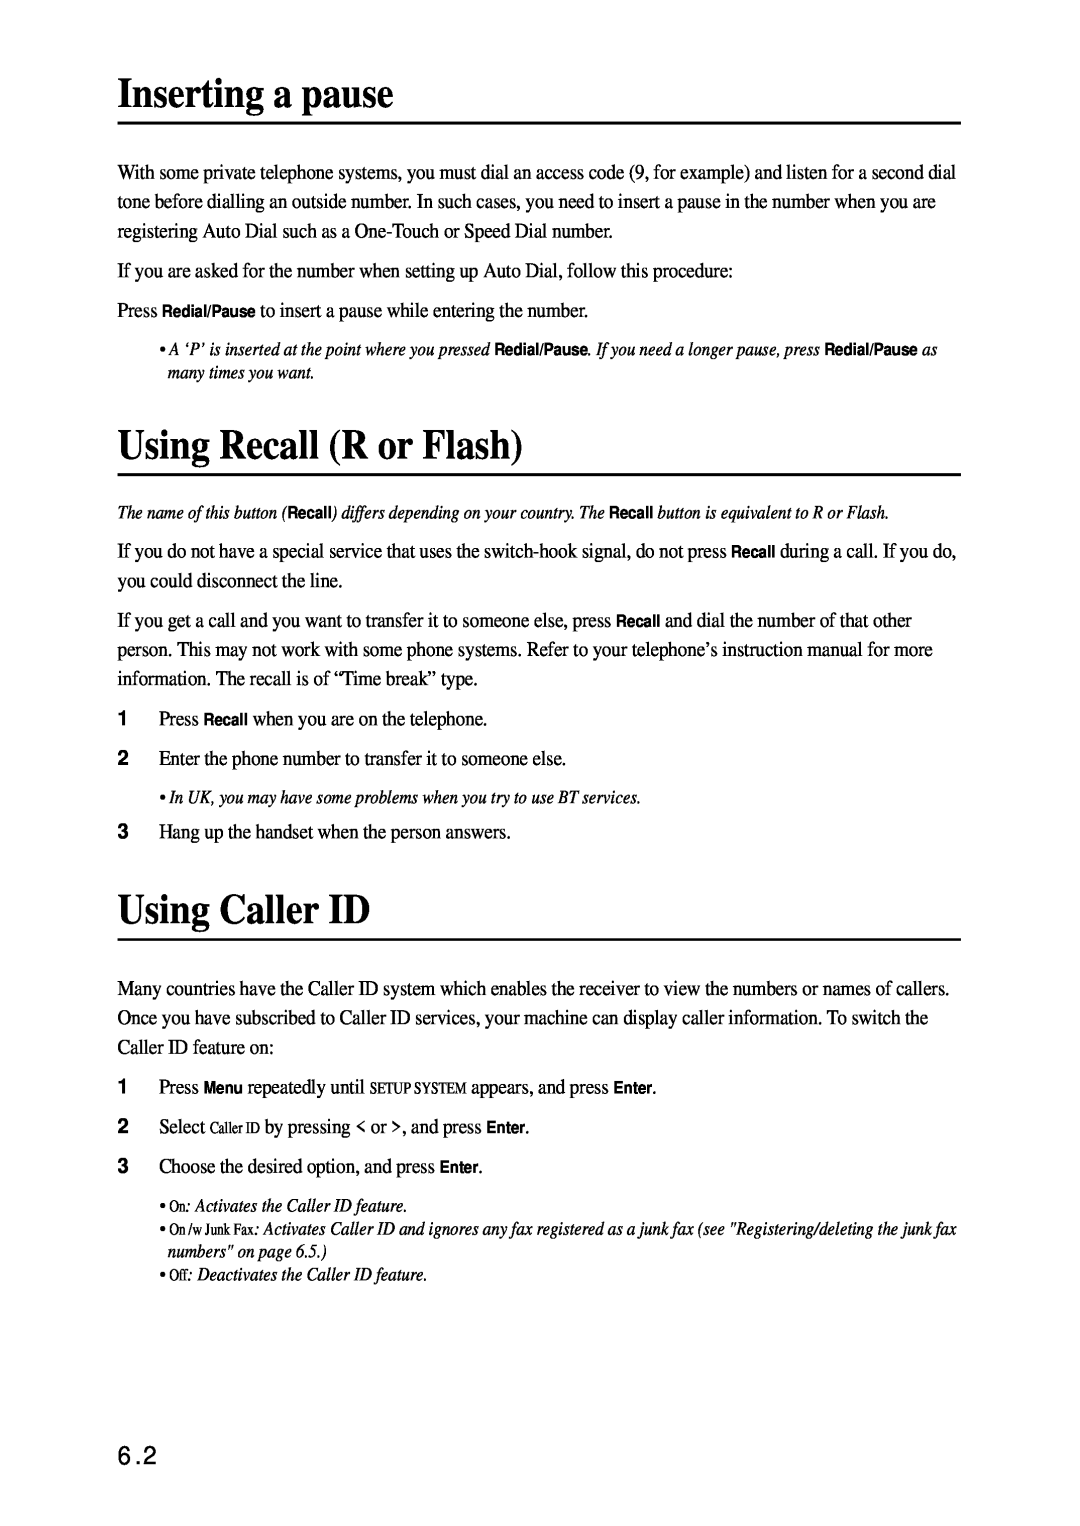 Samsung SF-340 Series manual Inserting a pause, Using Recall R or Flash, Using Caller ID 